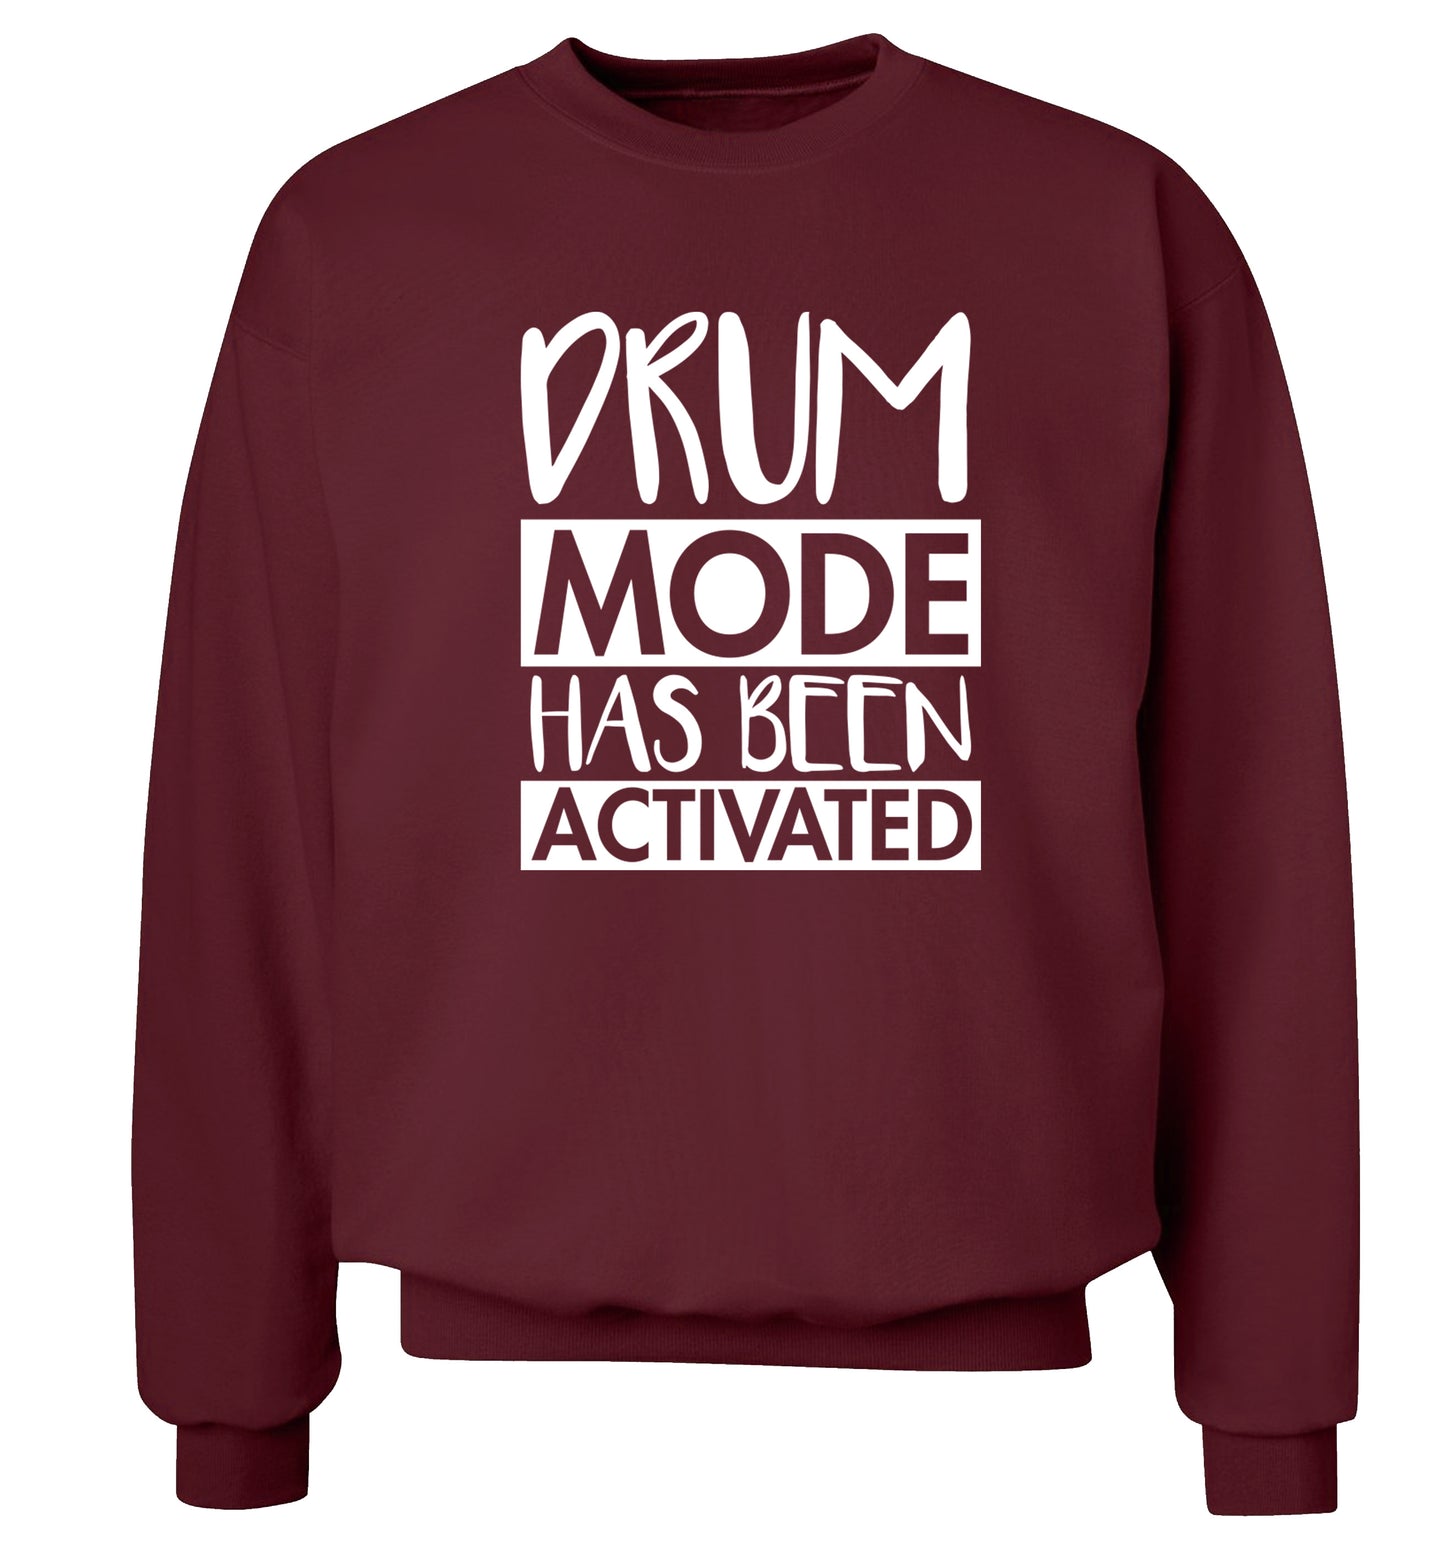 Drum mode activated Adult's unisexmaroon Sweater 2XL